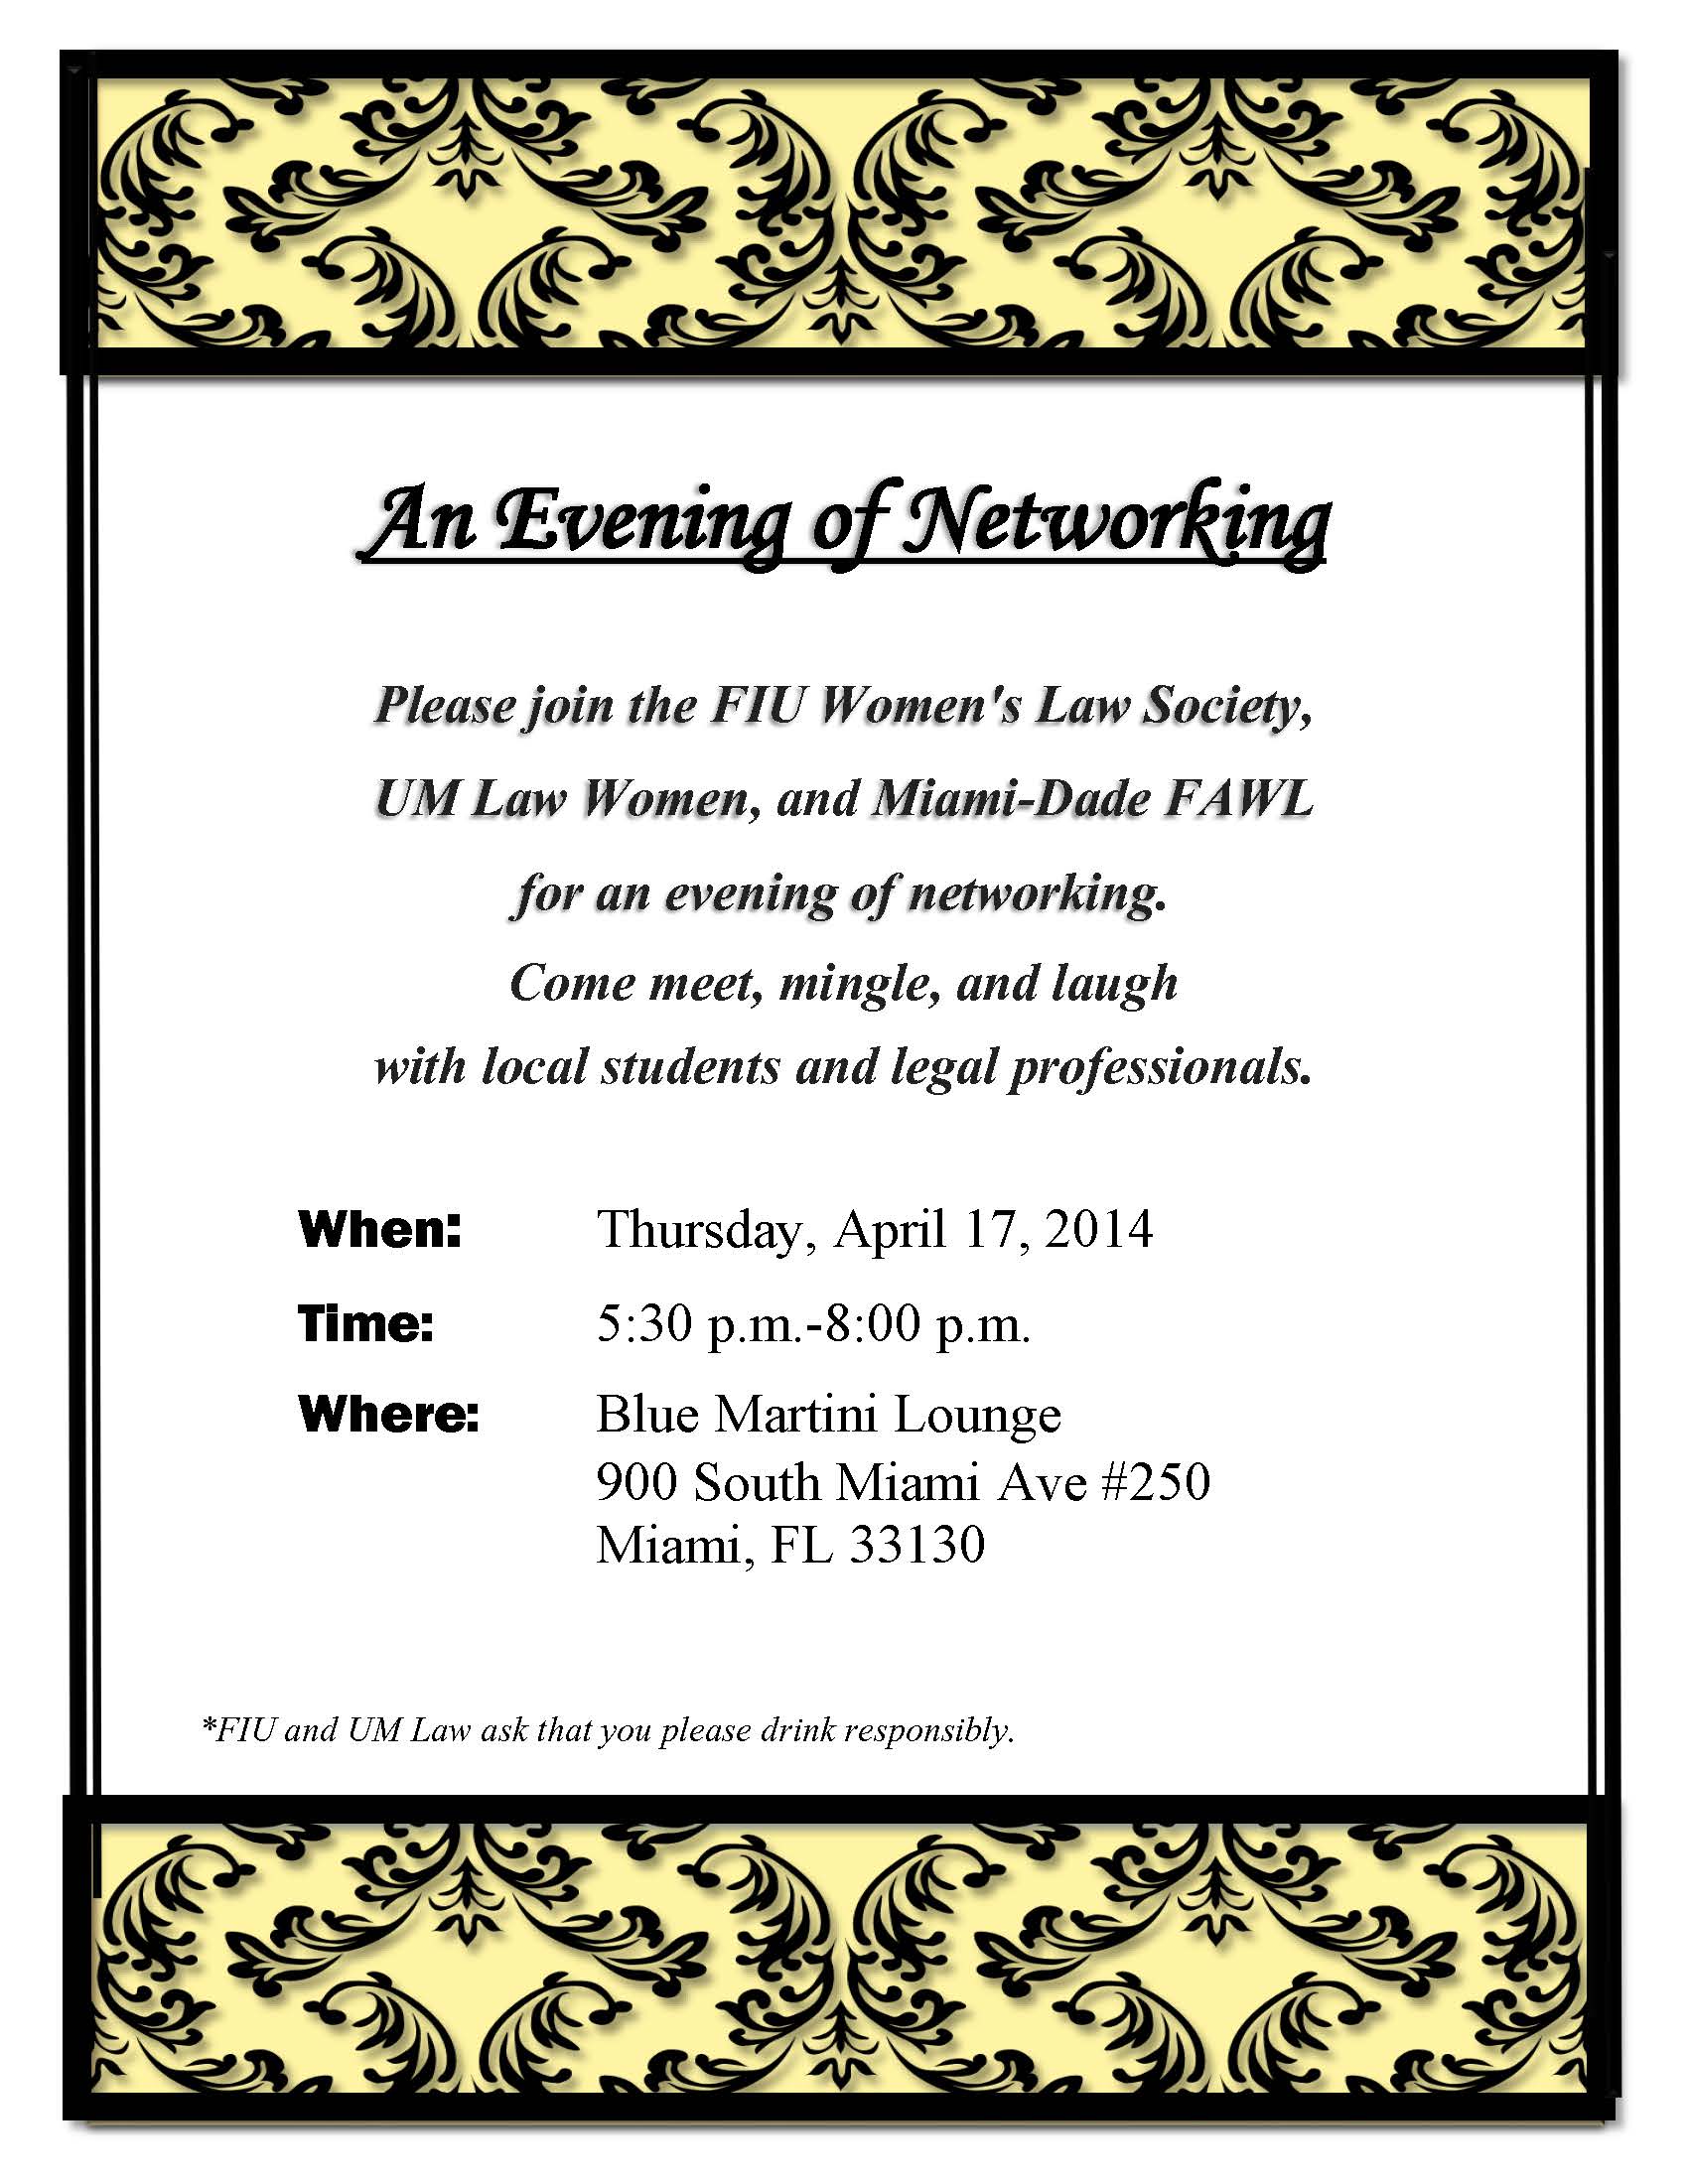 An Evening of Networking